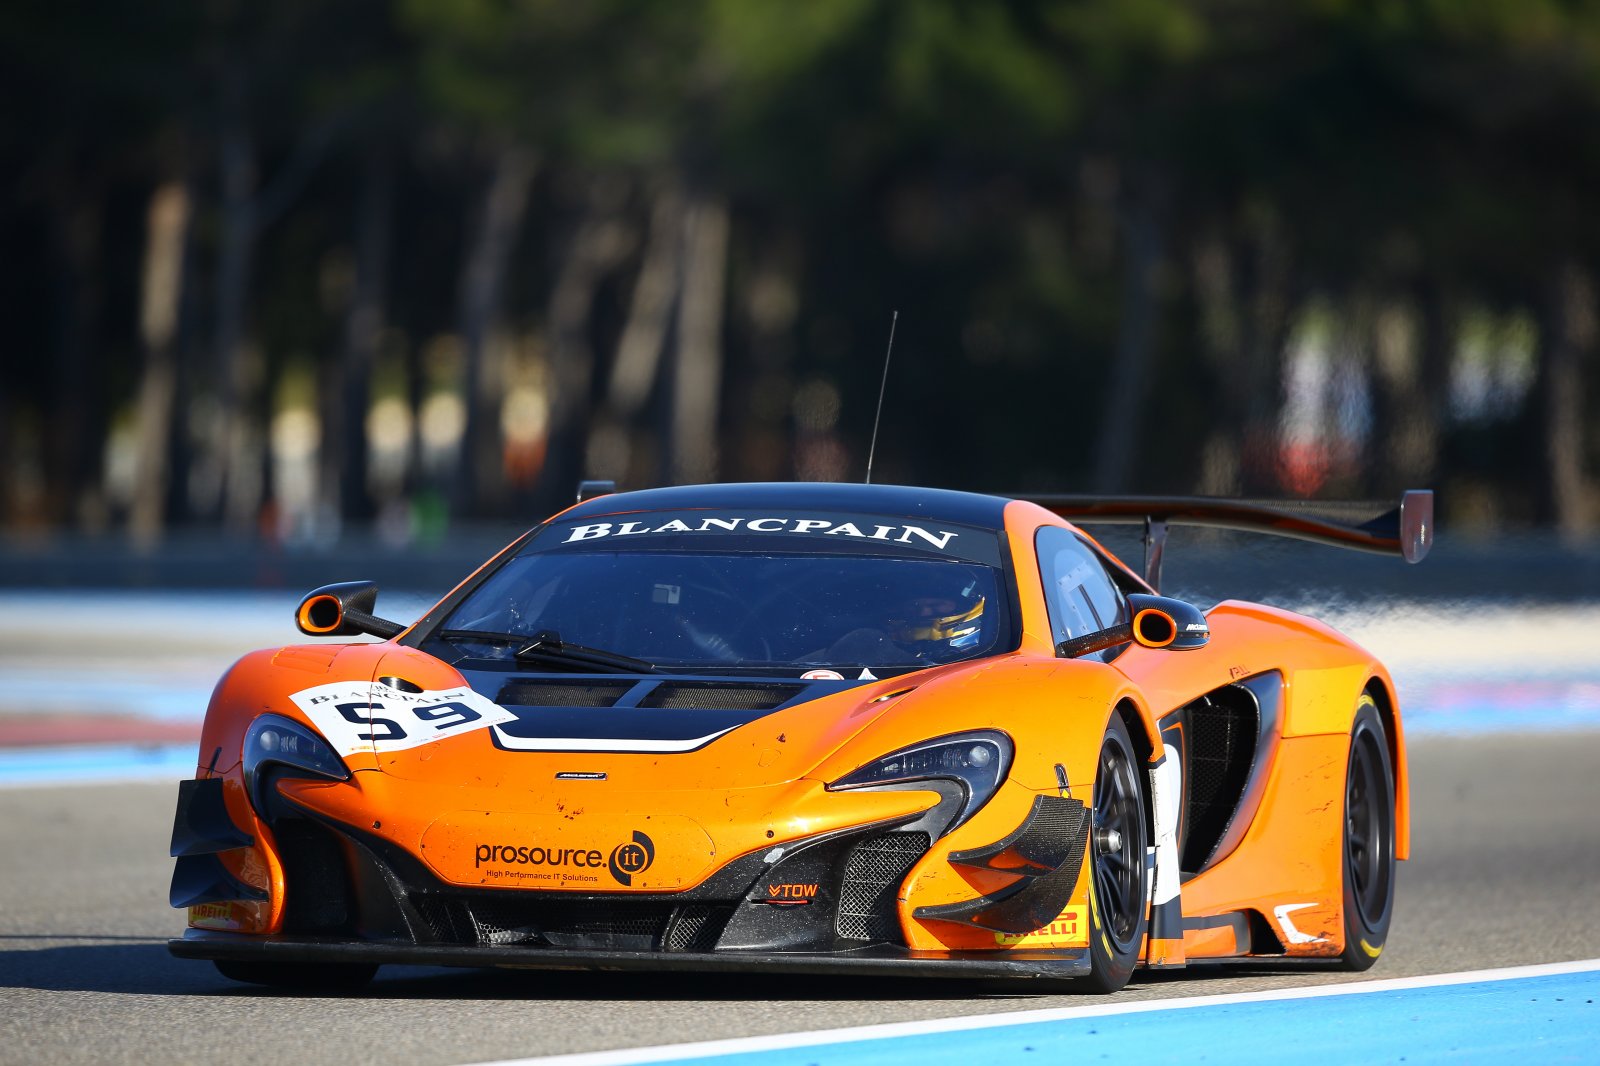 Craig Dolby and Martin Plowman join Garage 59 in Blancpain GT Series Sprint Cup